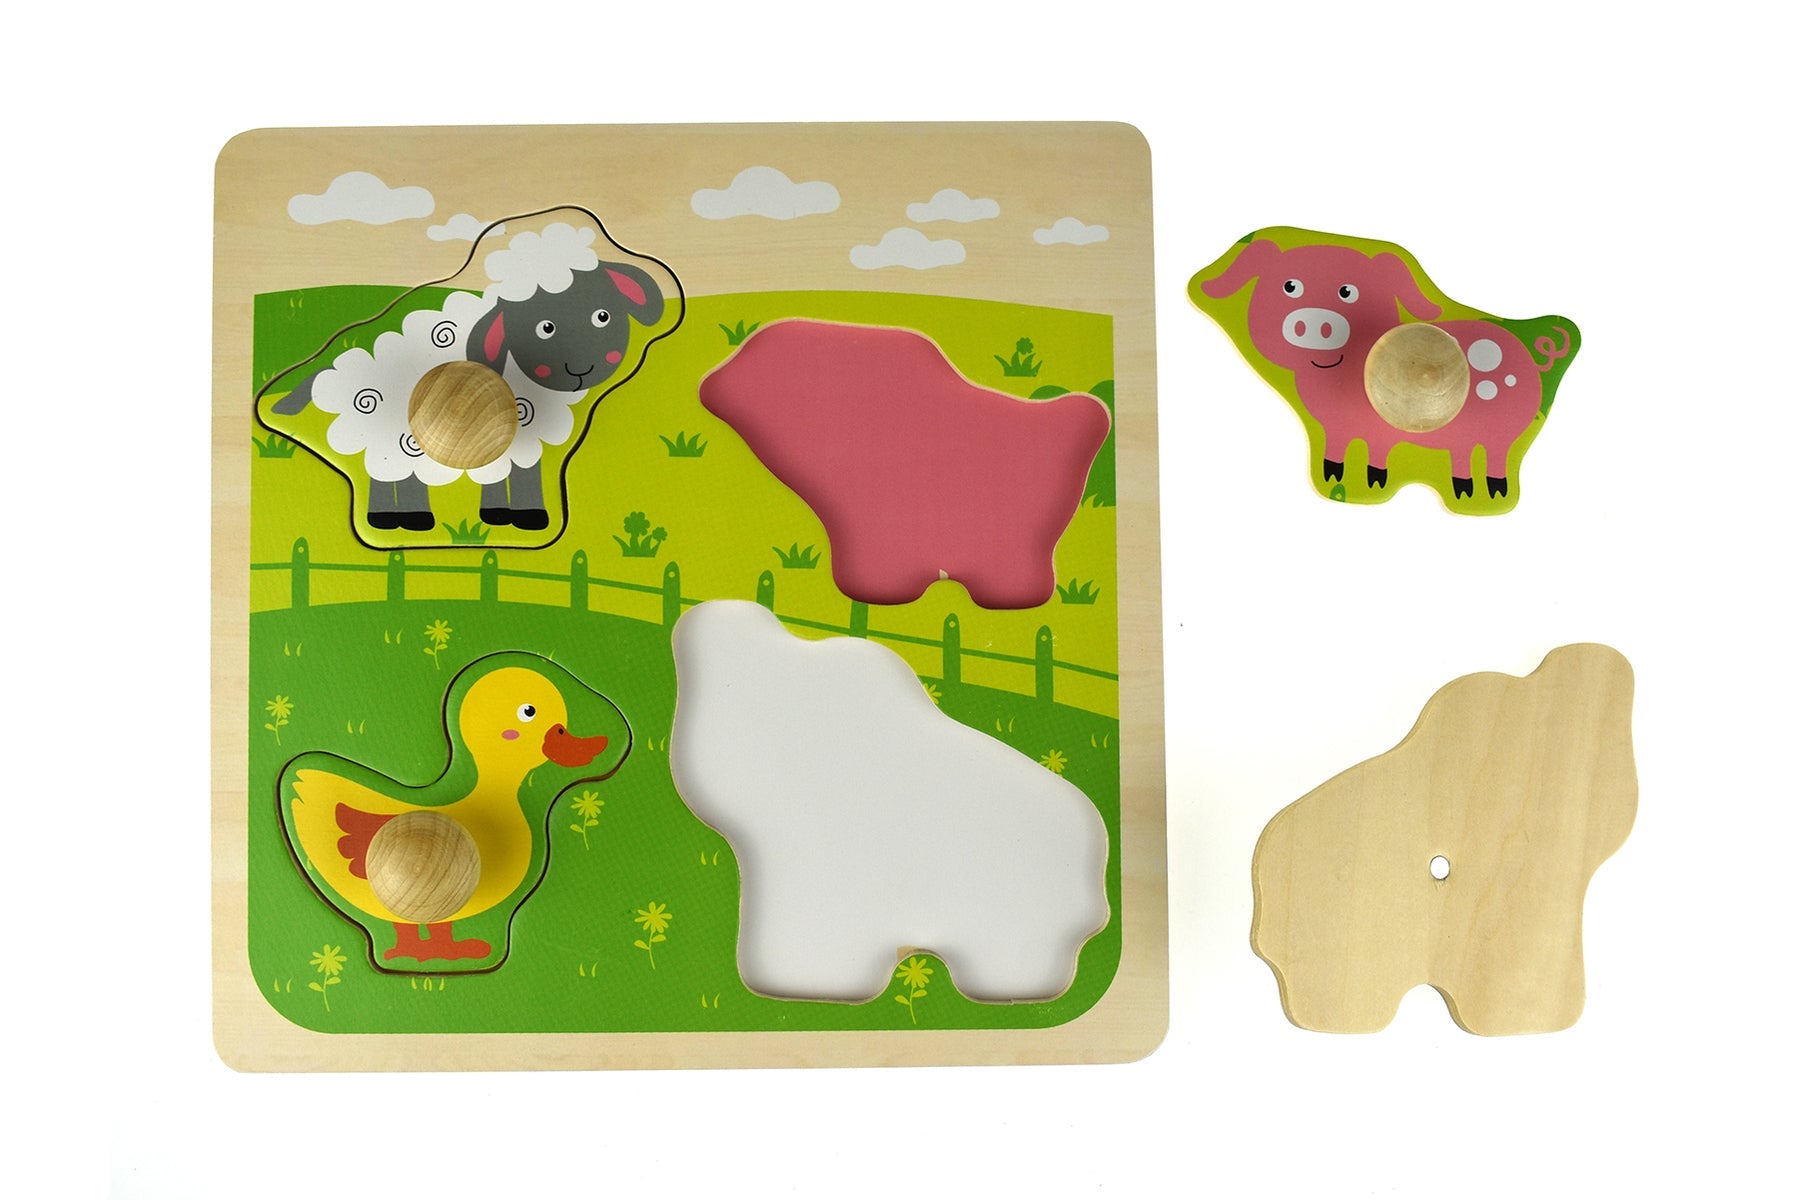 Farm Animal Large Peg Puzzle - A Wooden Educational Toy for Kids